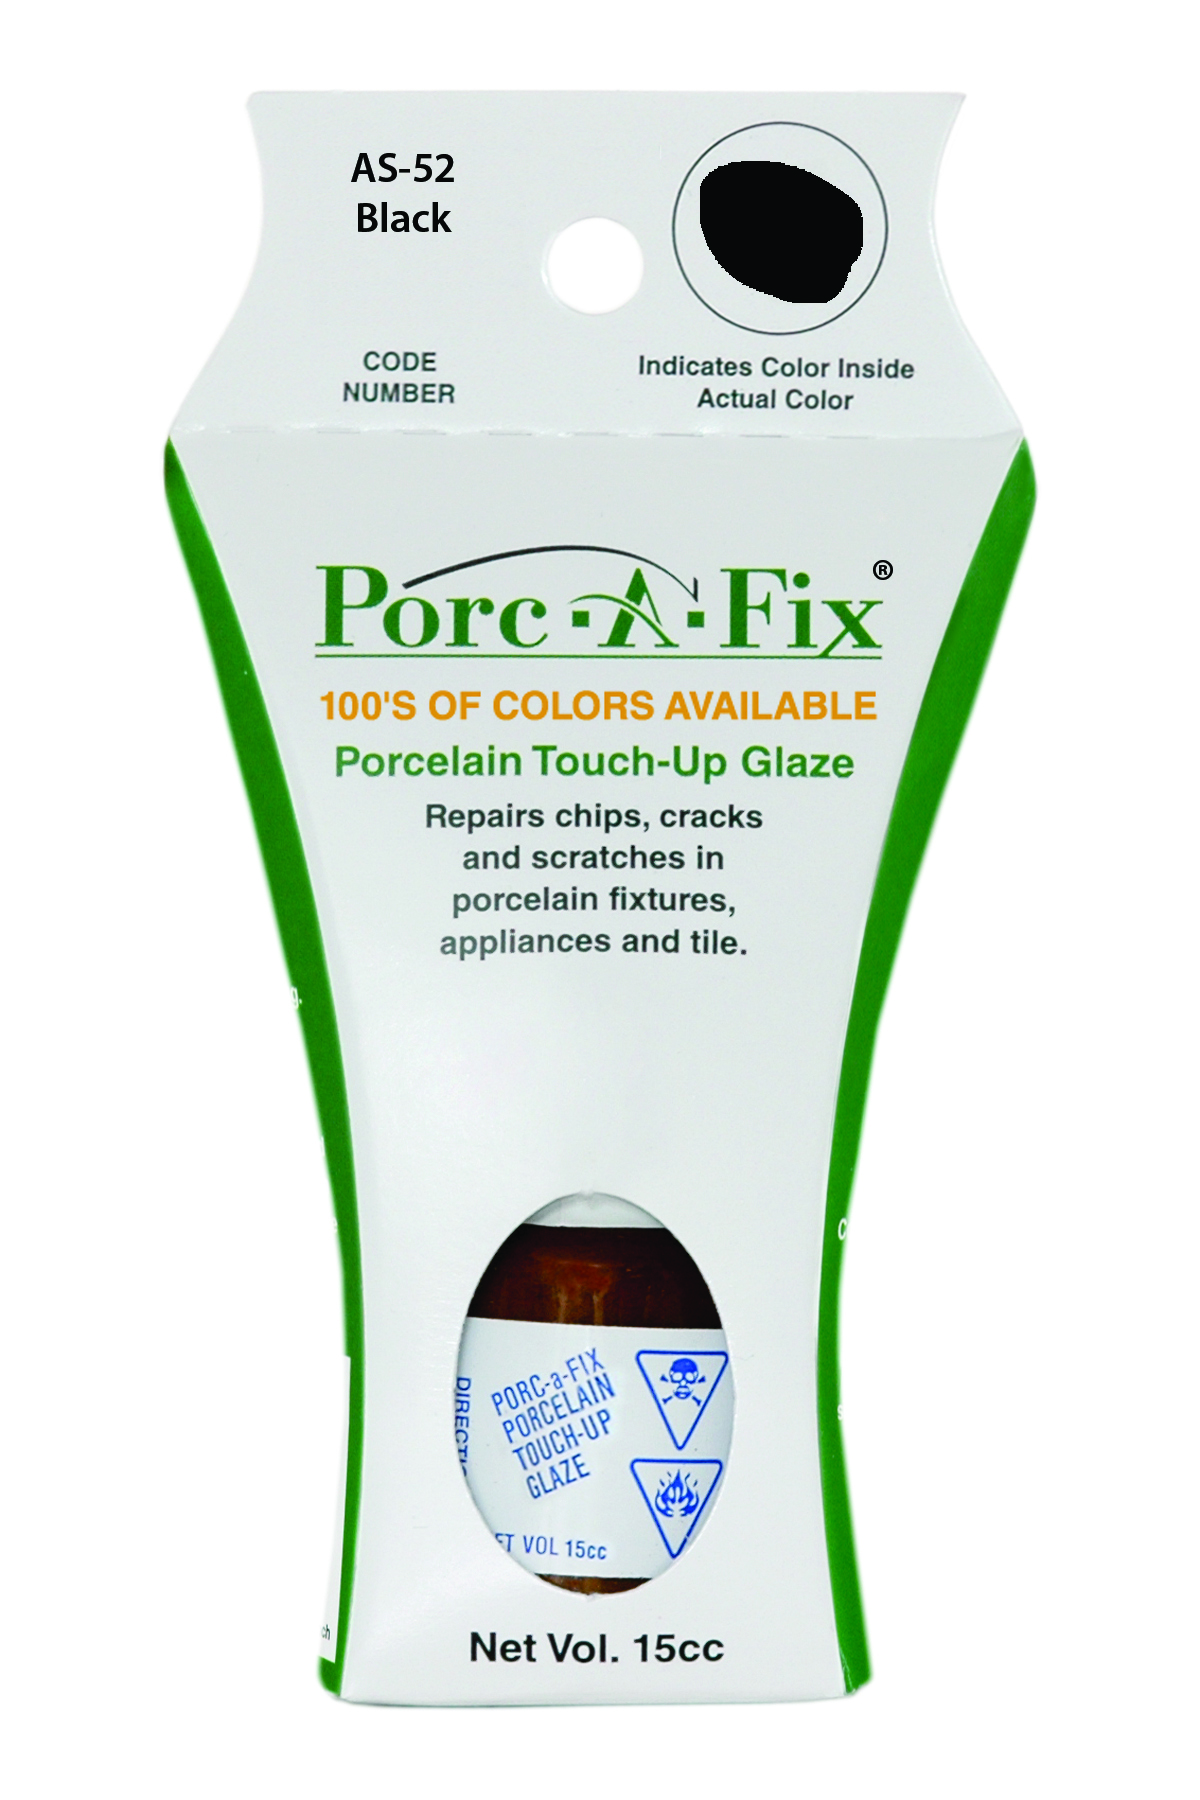 Fixture-Fix | AS-52 | Porc-A-Fix Touch-Up Glaze American Standard Black - Compatible with American Standard 070900-1780A Touch Up Paint Kit - BLACK